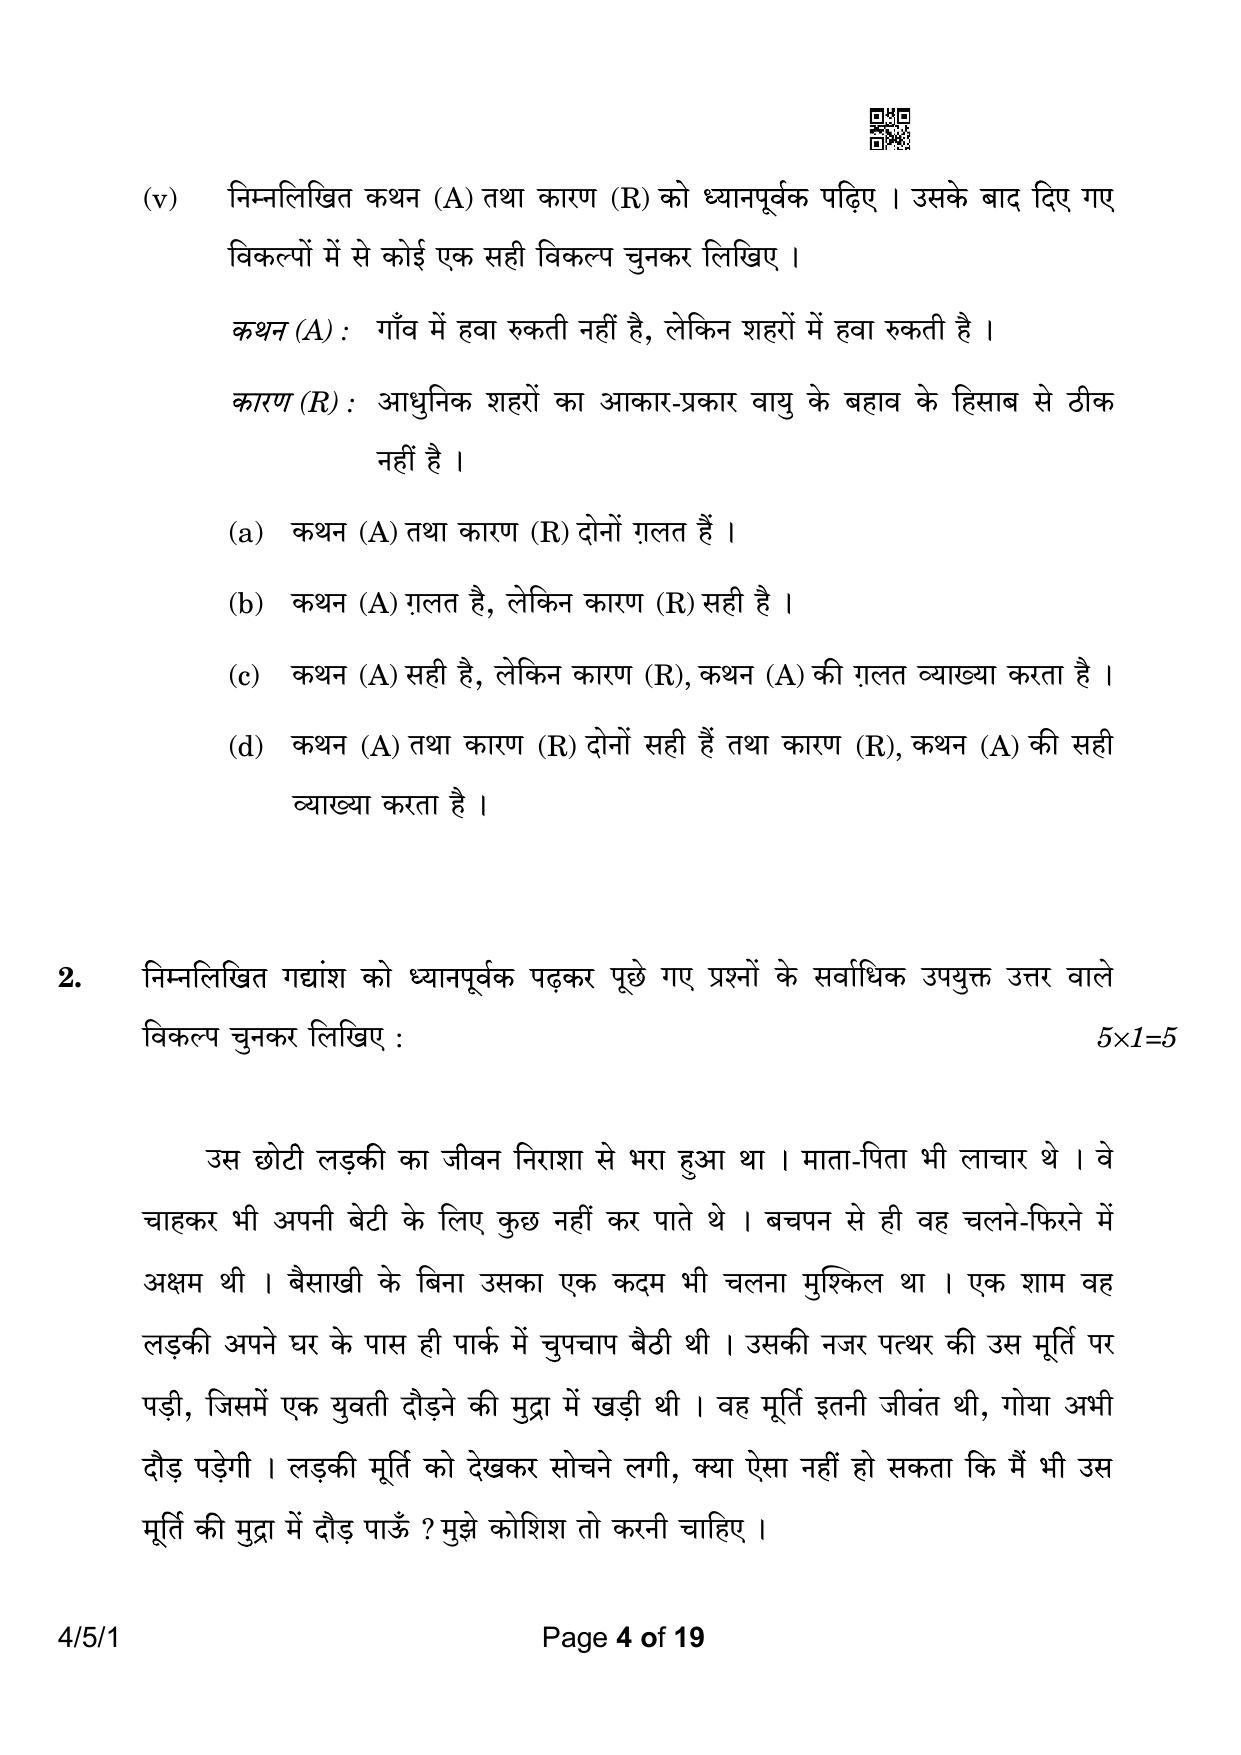 CBSE Class 10 4-5-1 Hindi B 2023 Question Paper - Page 4